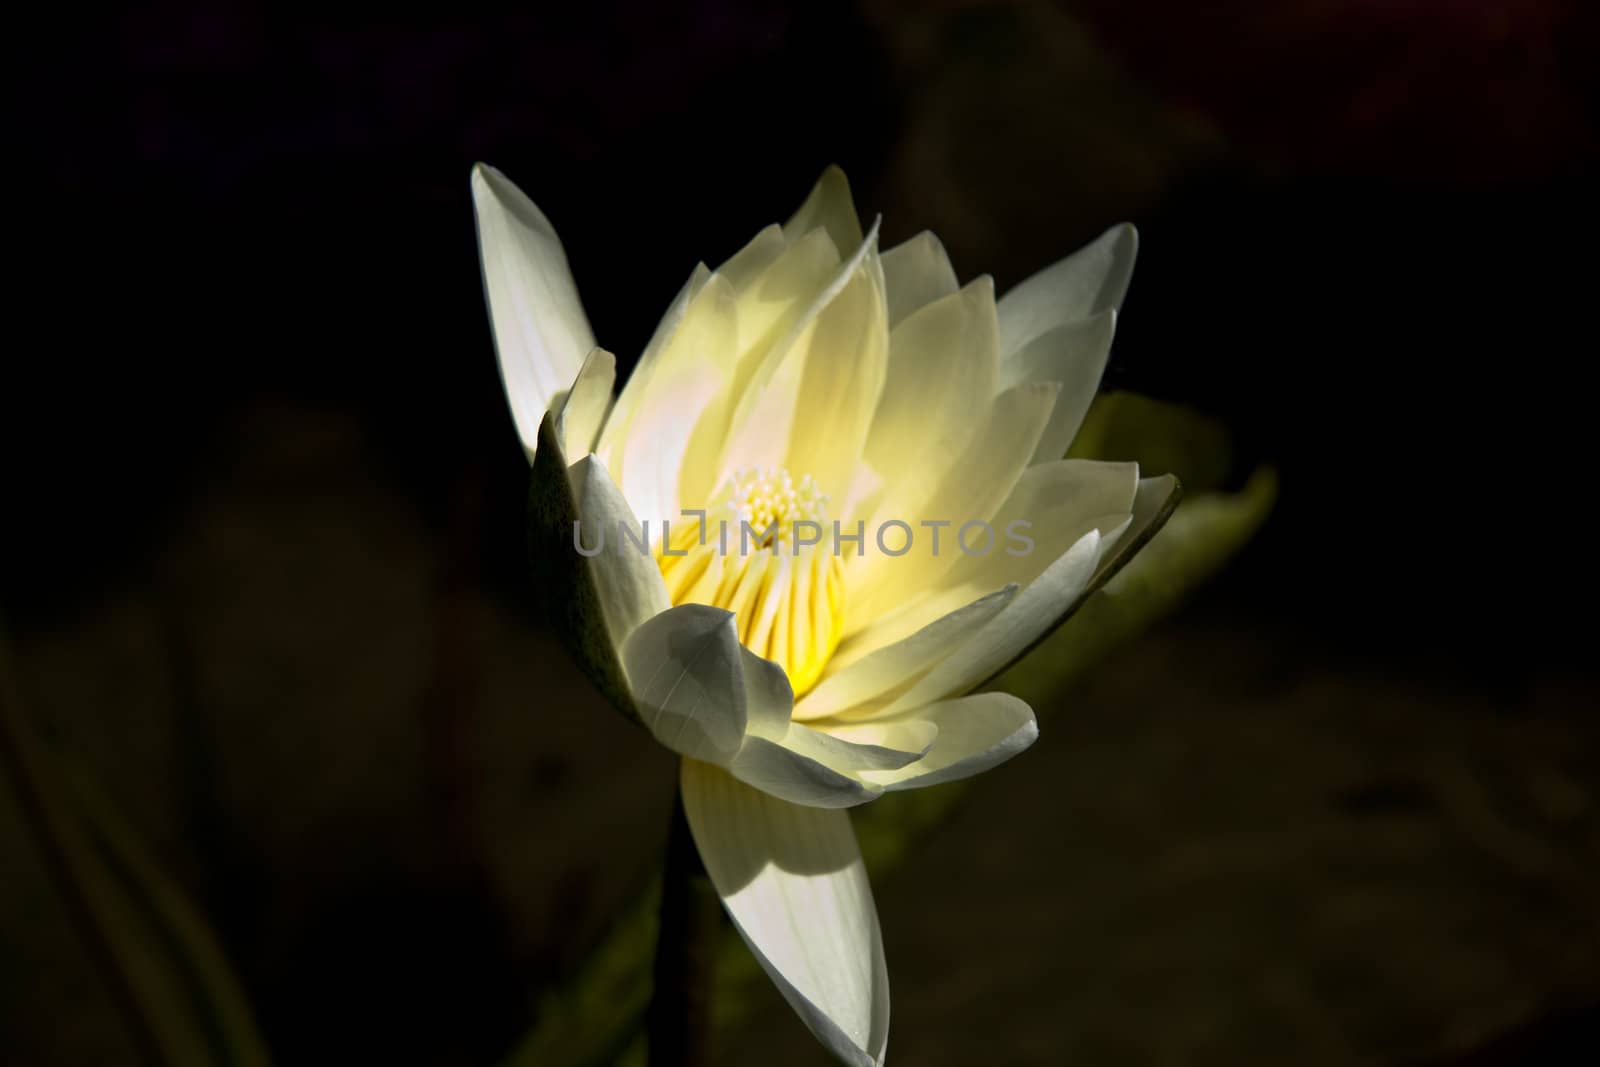 A white and yellow lily sitting in a pond of water